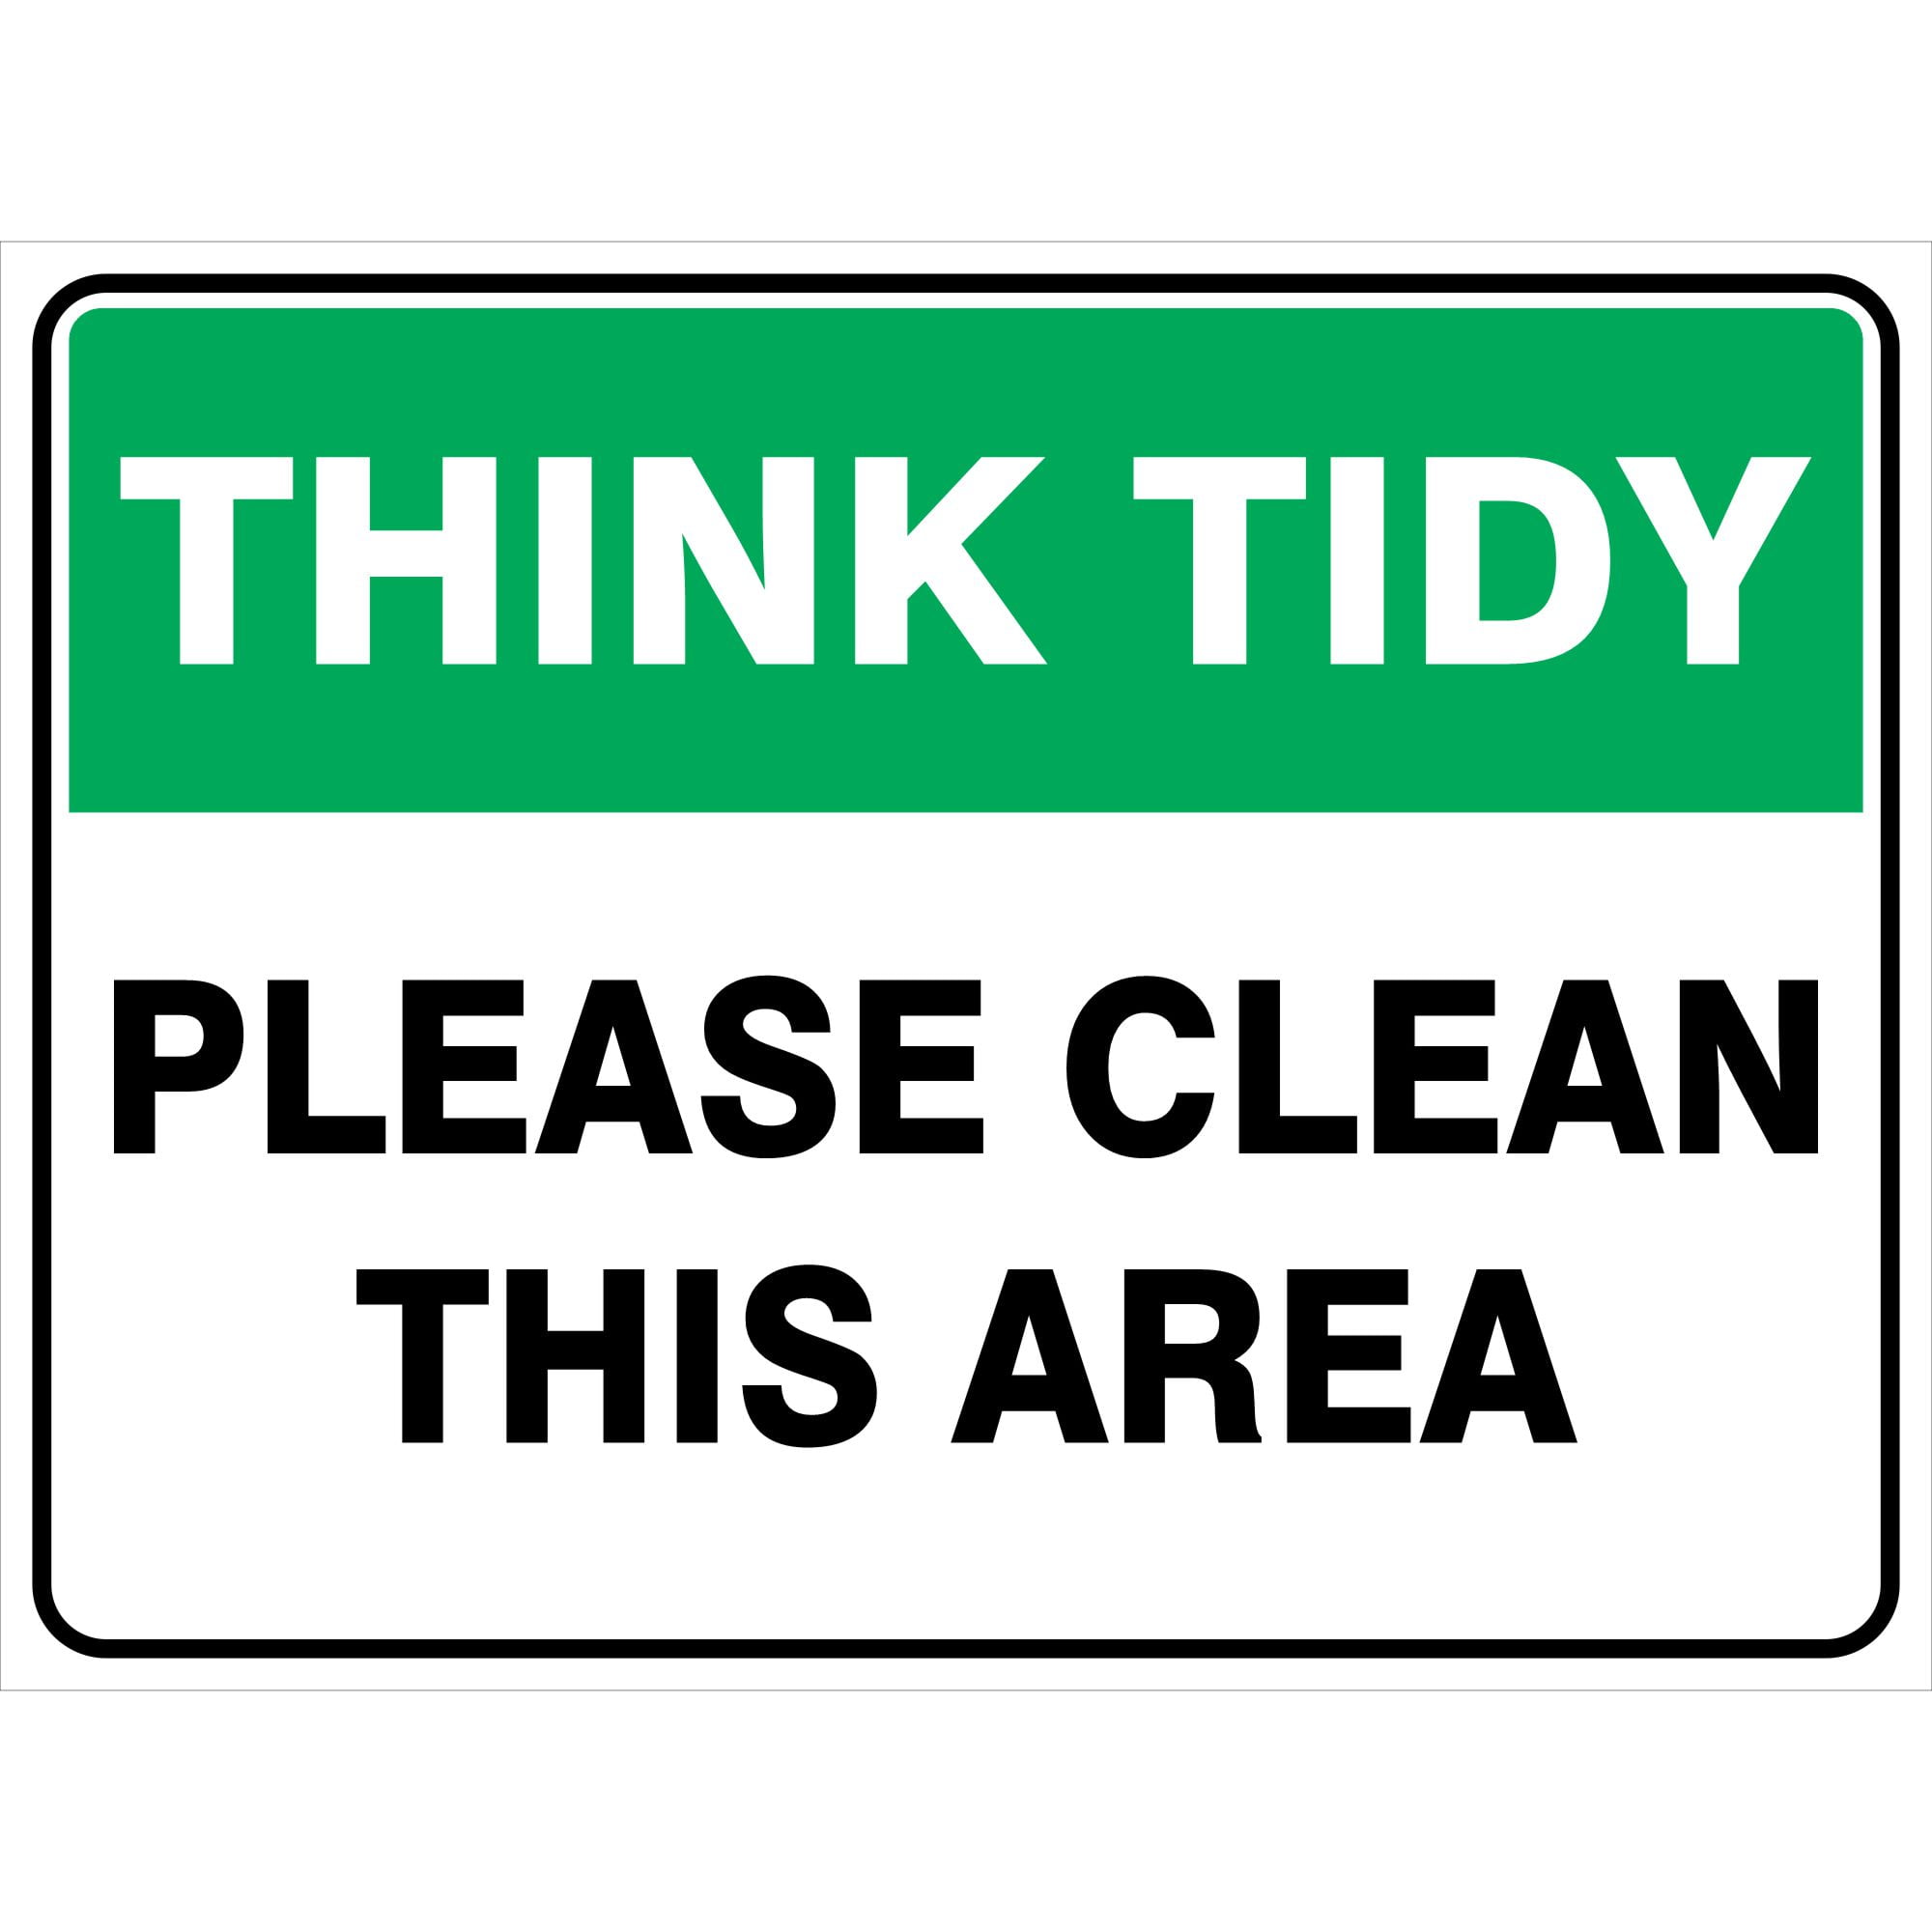 Clean and tidy. Tidy clean разница. Think sign. Keep Britain tidy. BTD-23l-a please clean.